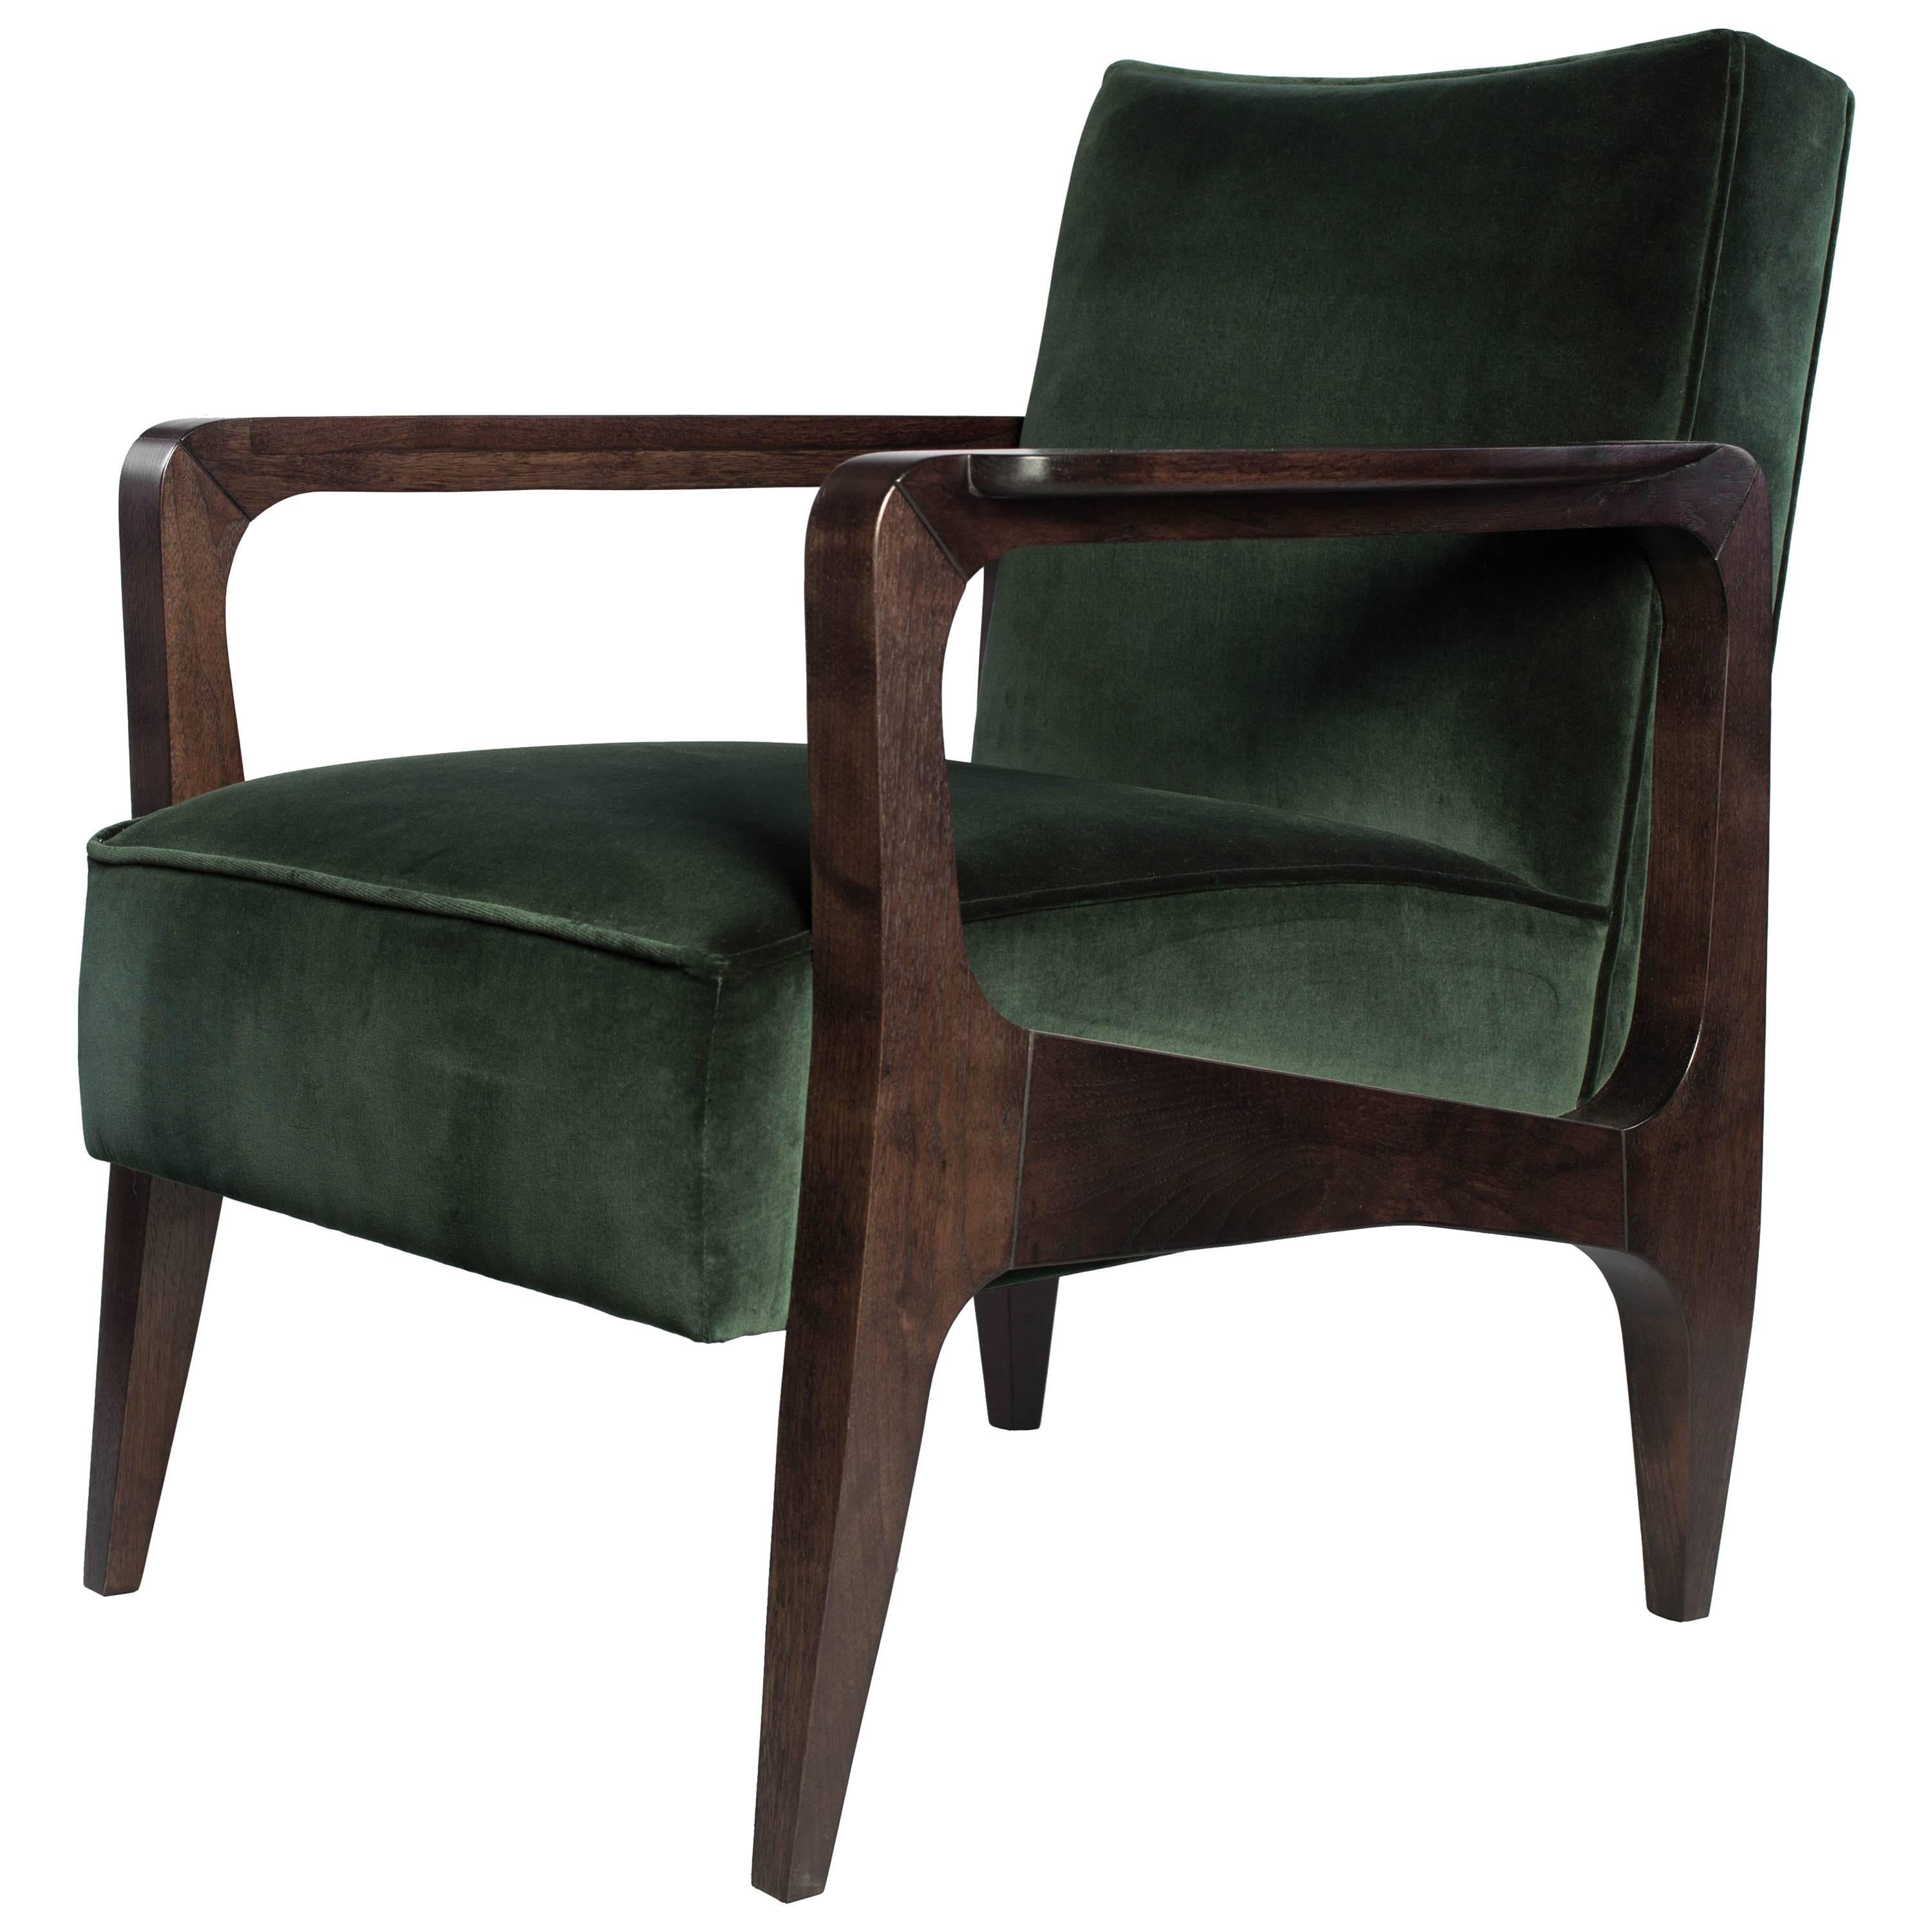 Atena Armchair in Black American Walnut Stained in Black Ebony and Luxe Velvet